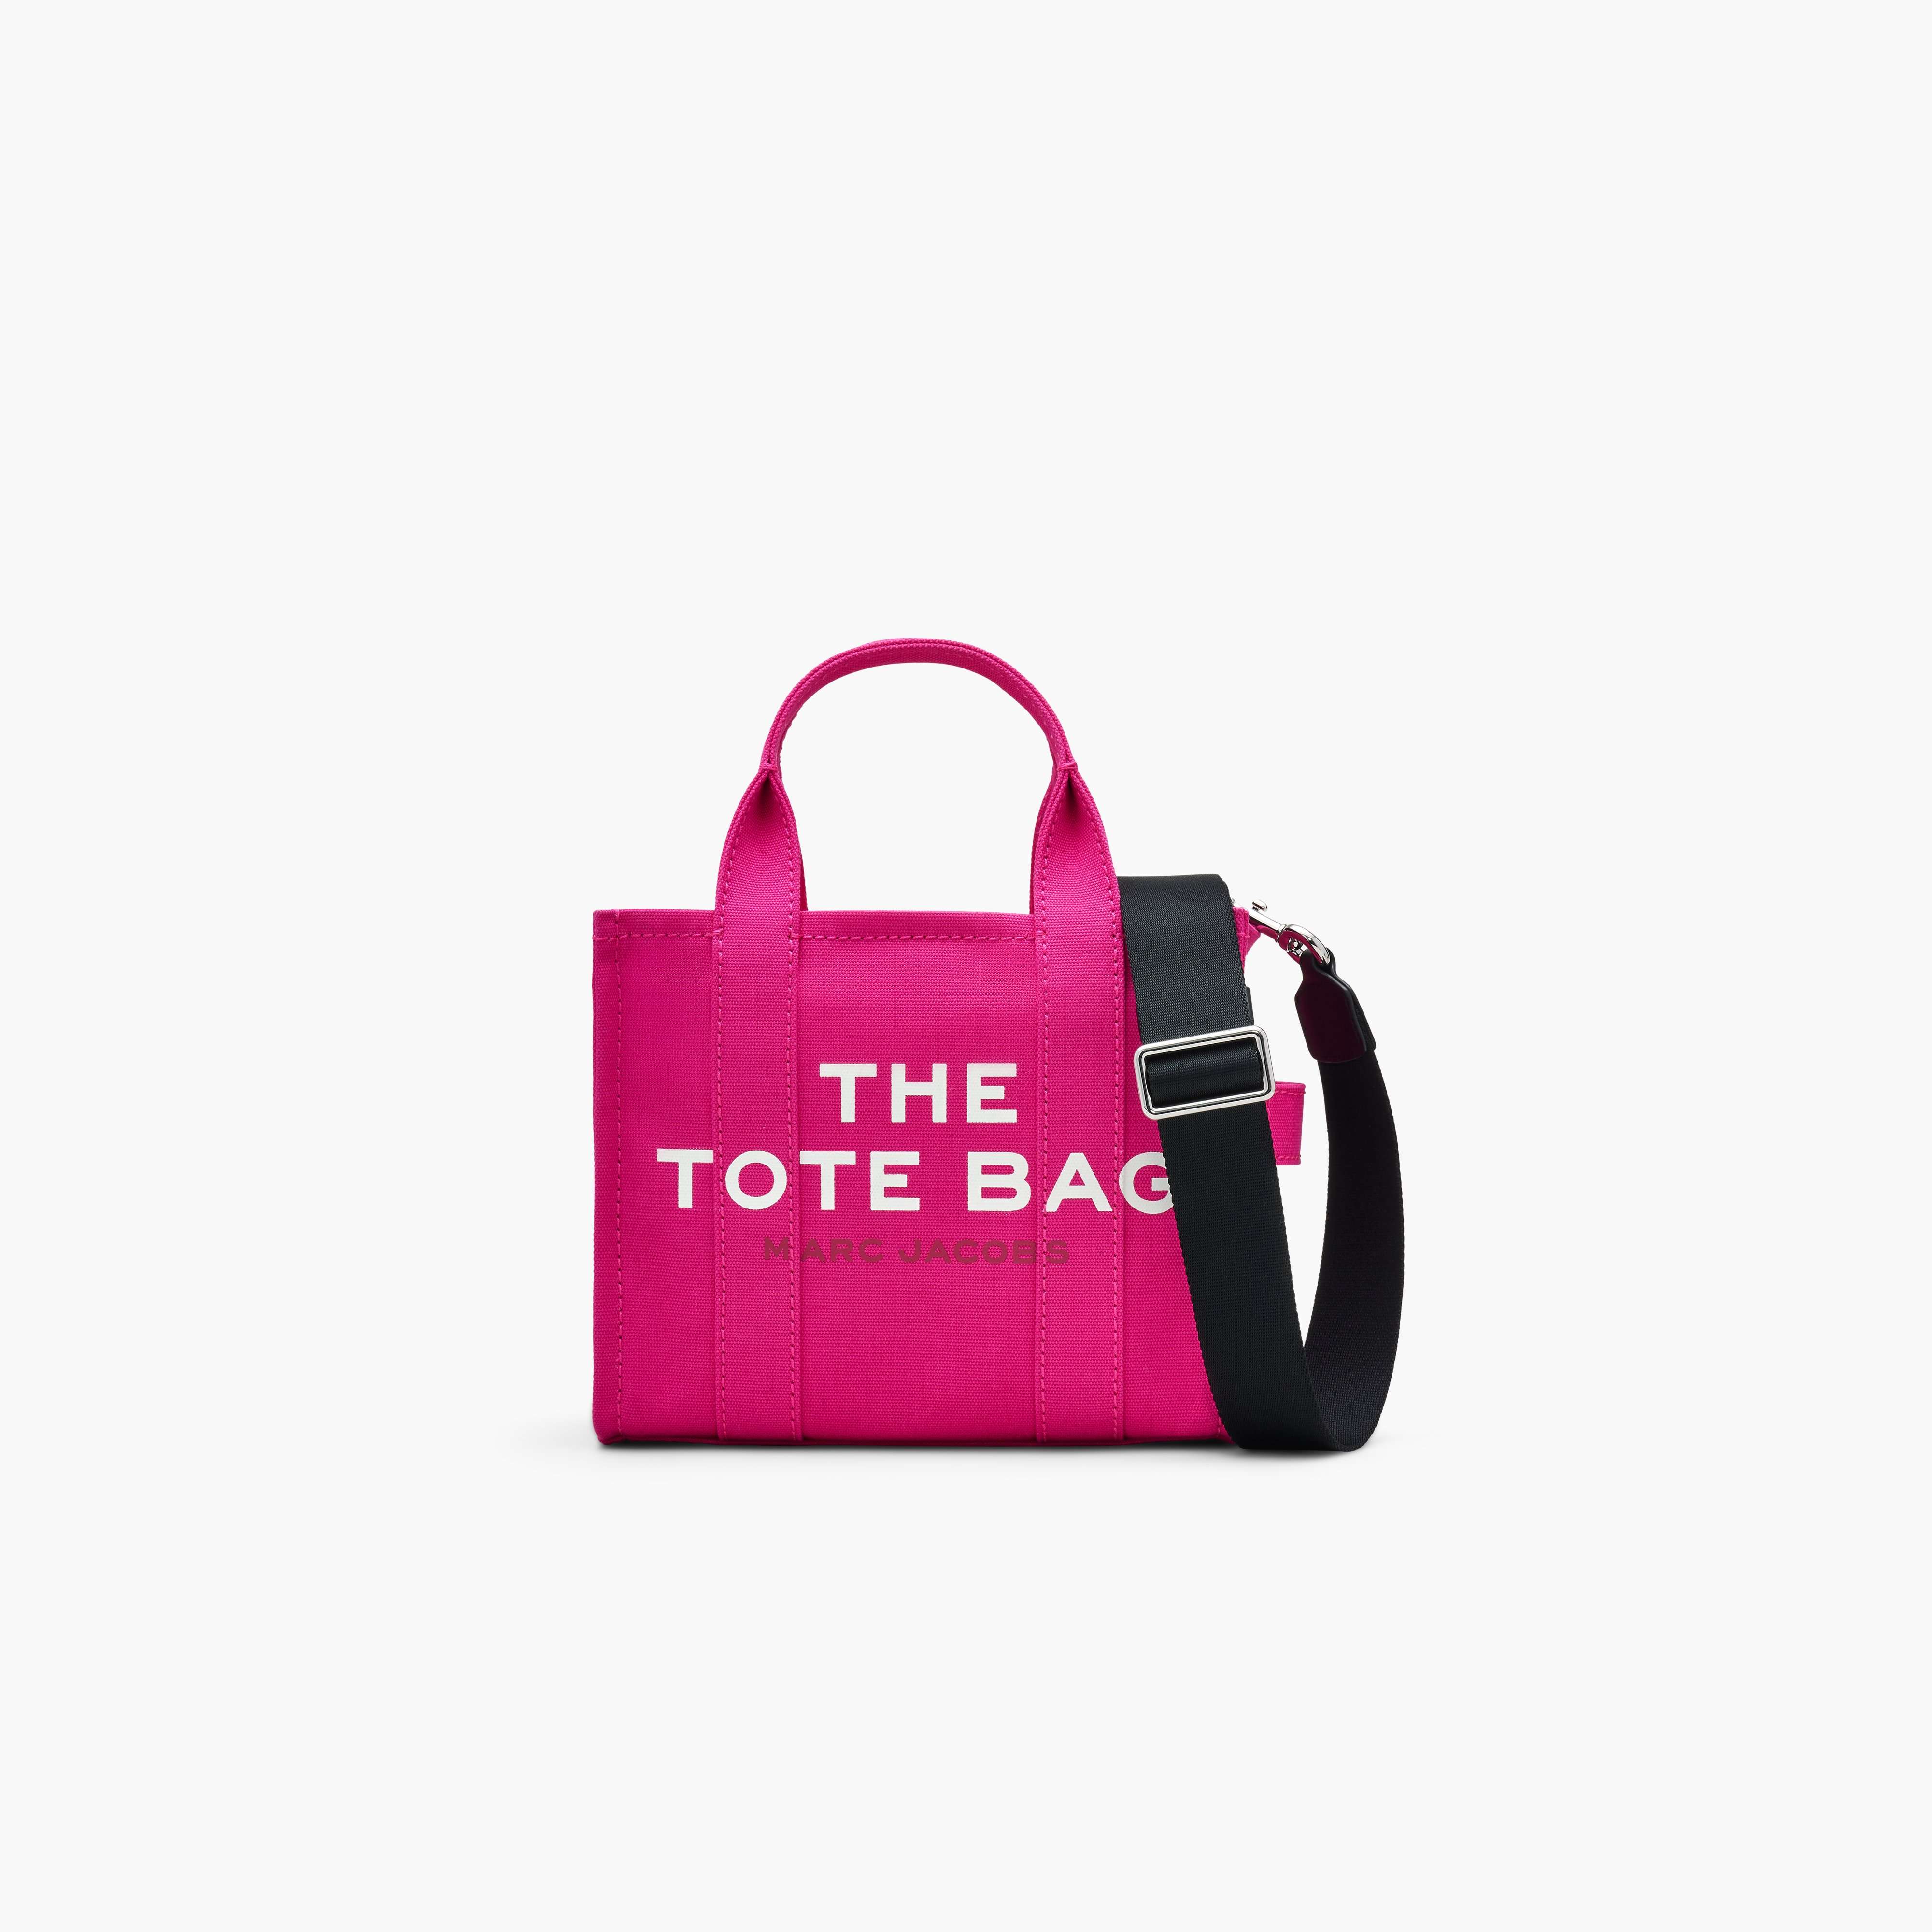 The Canvas Small Tote Bag in Hot Pink